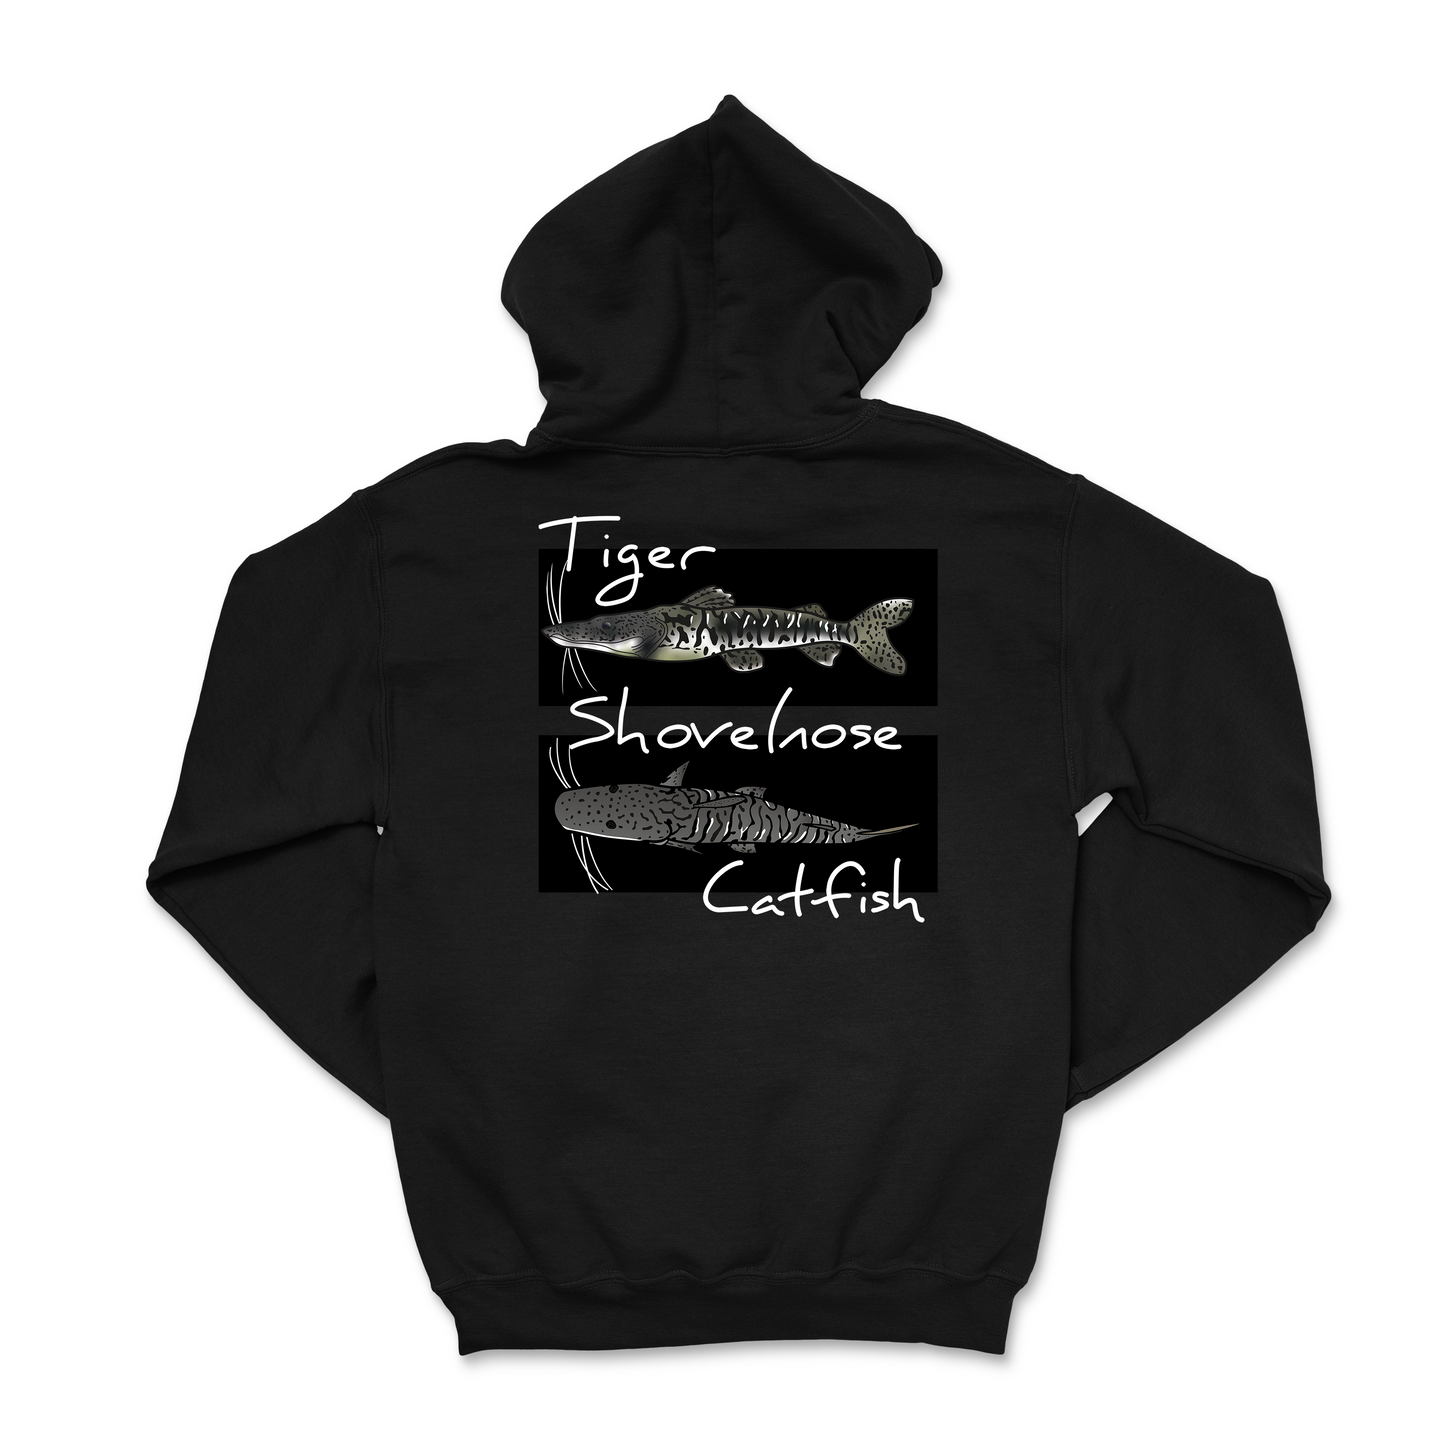 The Tank Life Apparel tiger shovelnose catfish design on a super soft and comfortable hoodie. Gray catfish with stripes.